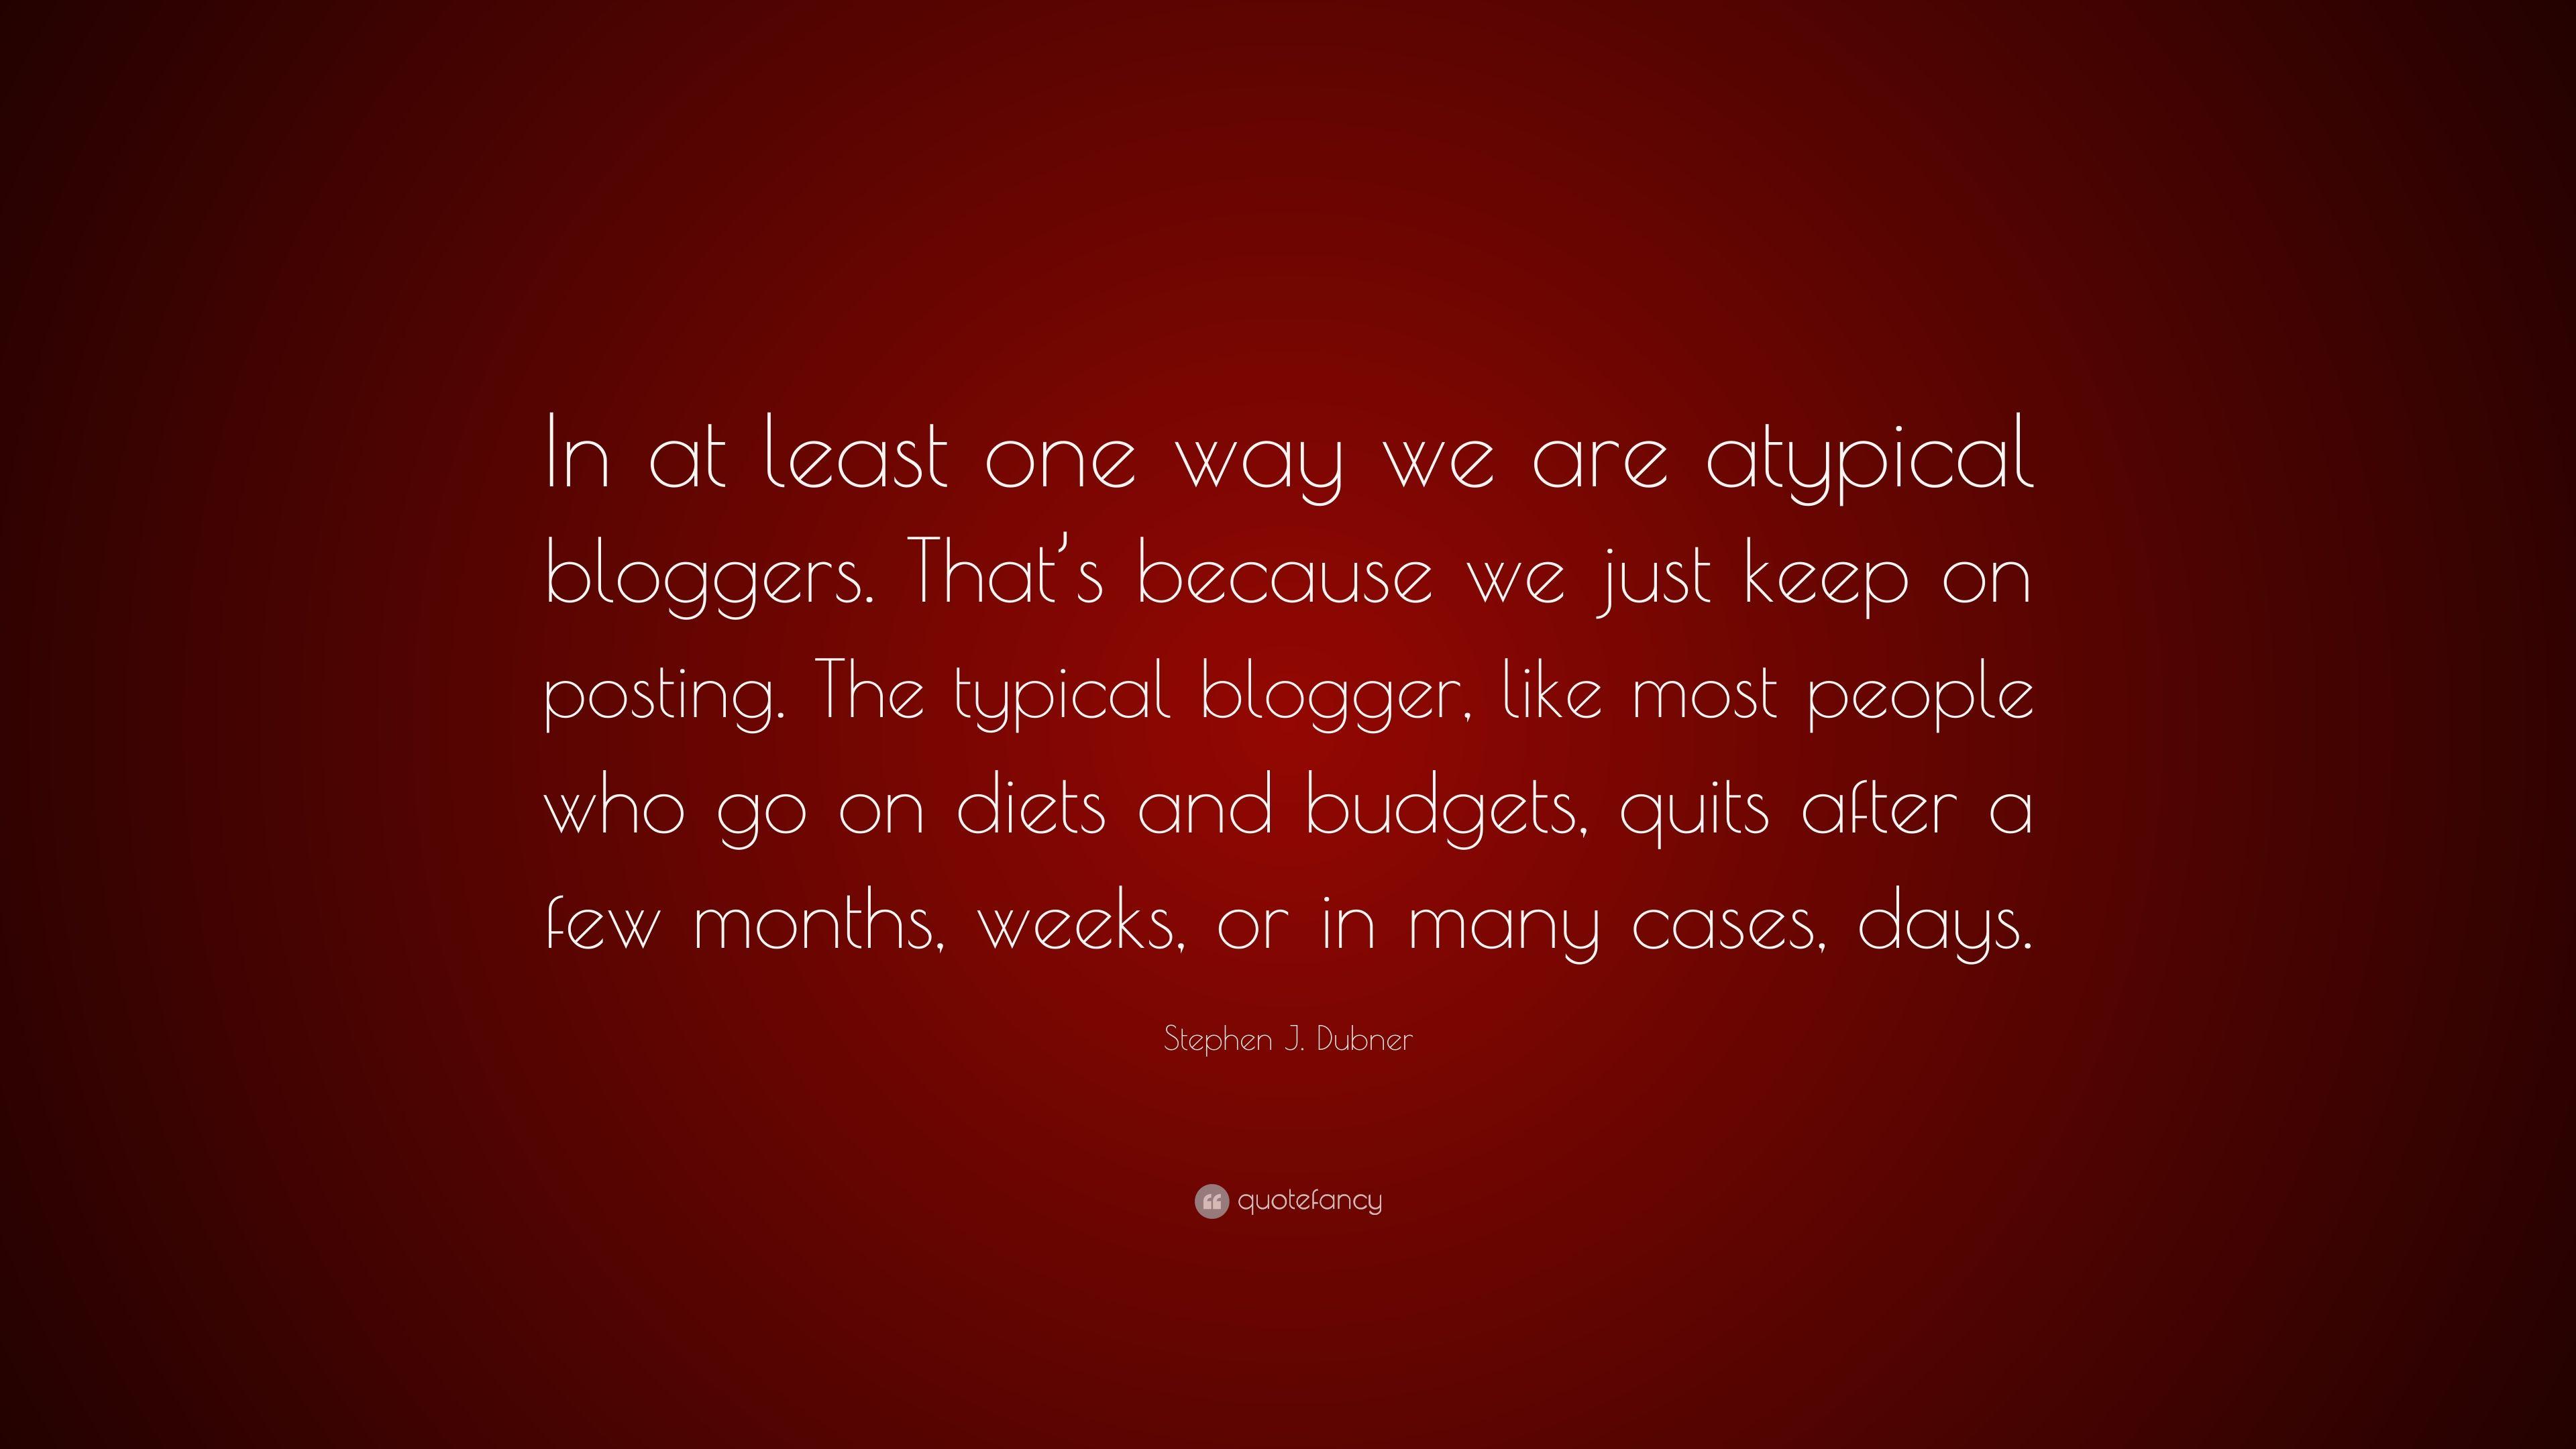 Stephen J. Dubner Quote: “In at least one way we are atypical